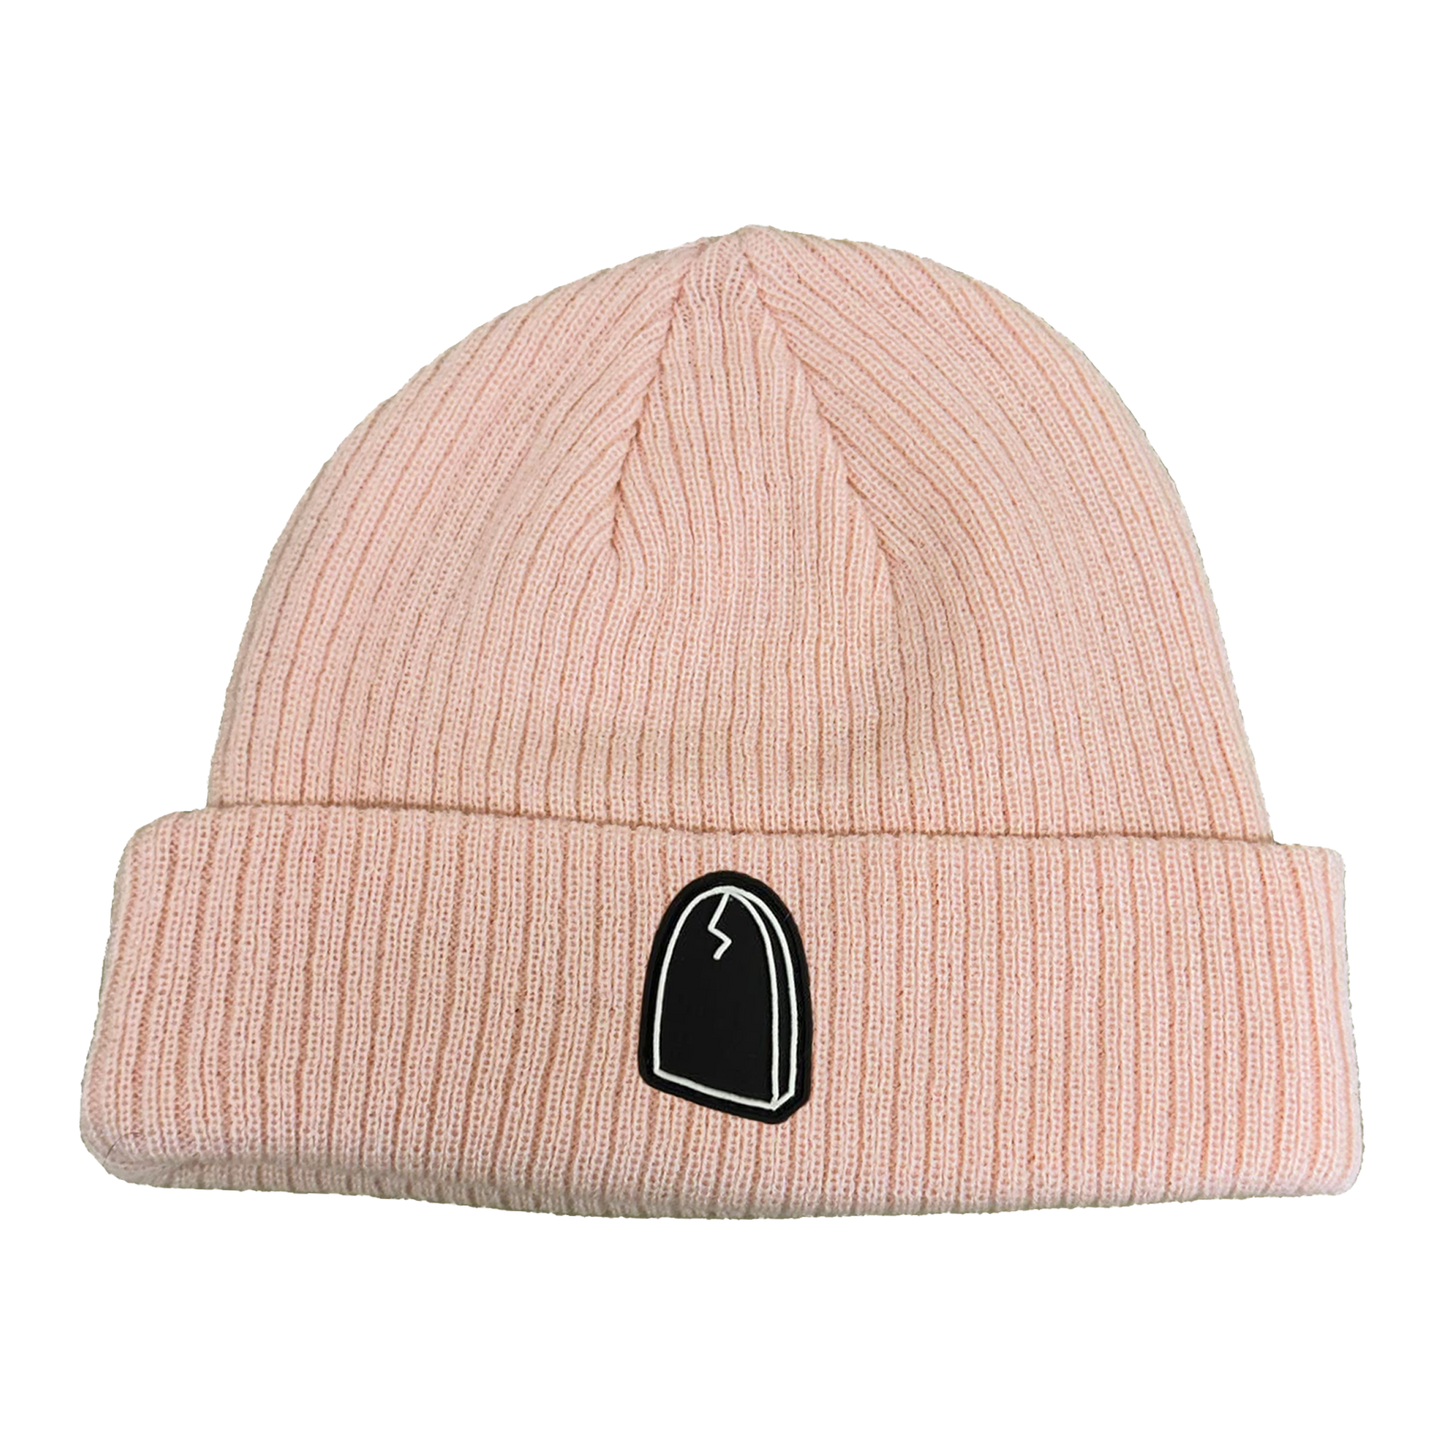 Rubber Patch Beanie (Pink)